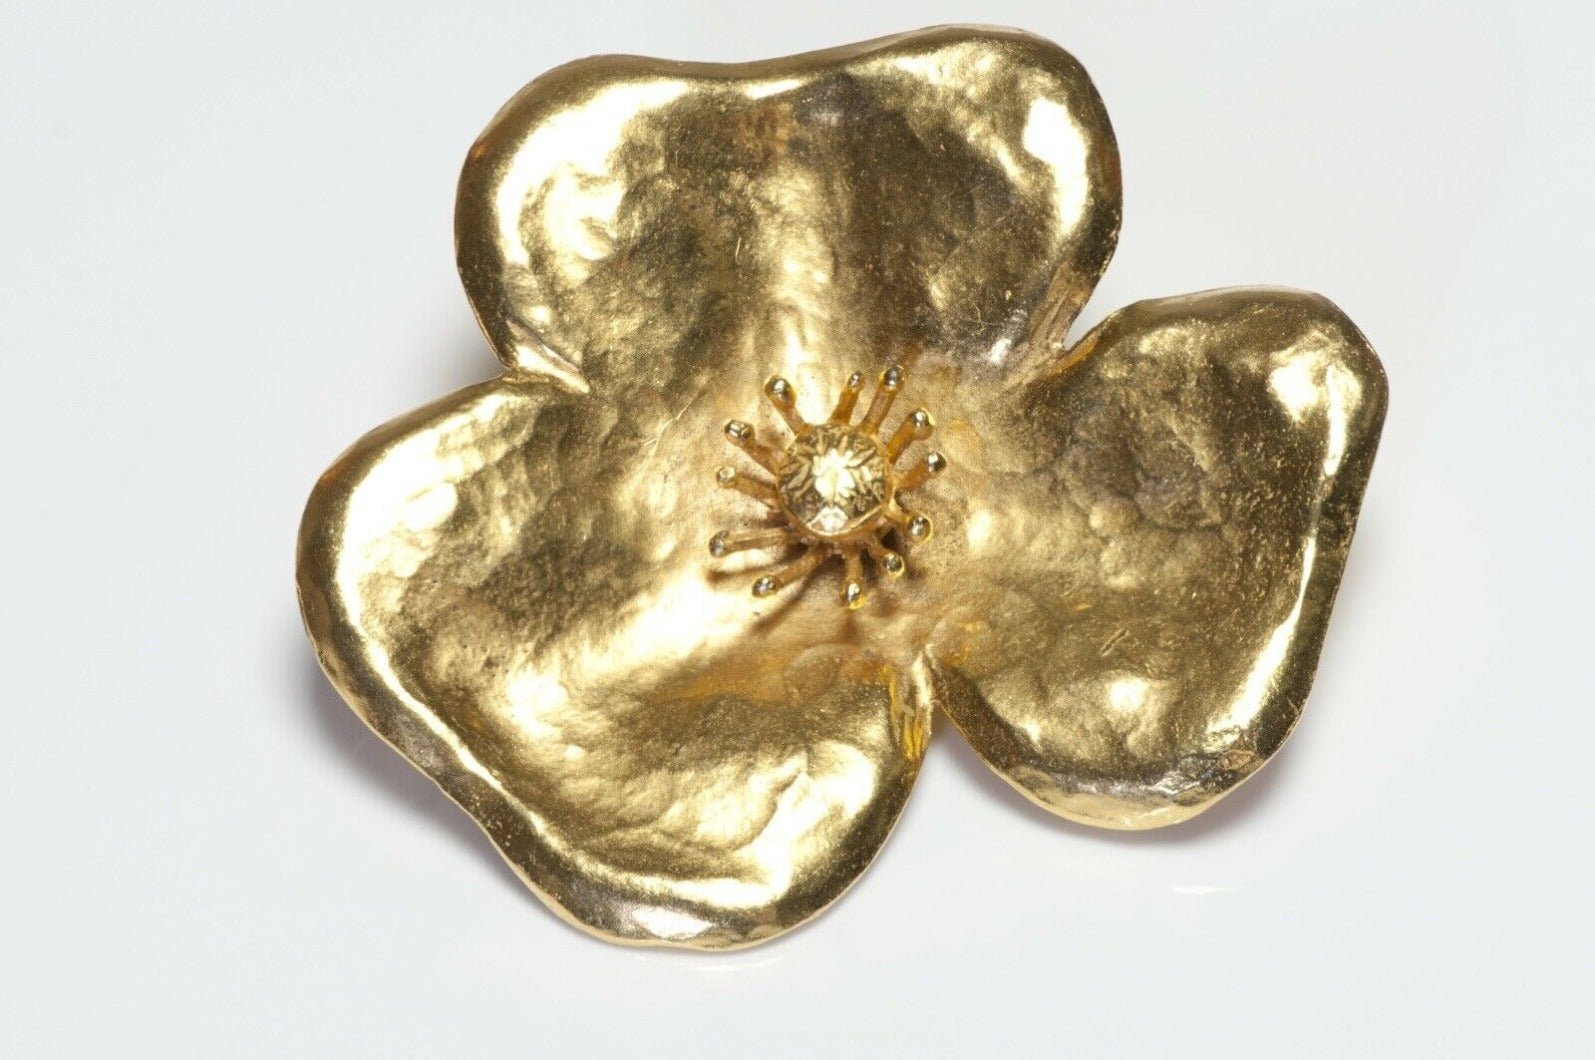 Yves Saint Laurent YSL Rive Gauche Gold Plated Pansy Flower Brooch